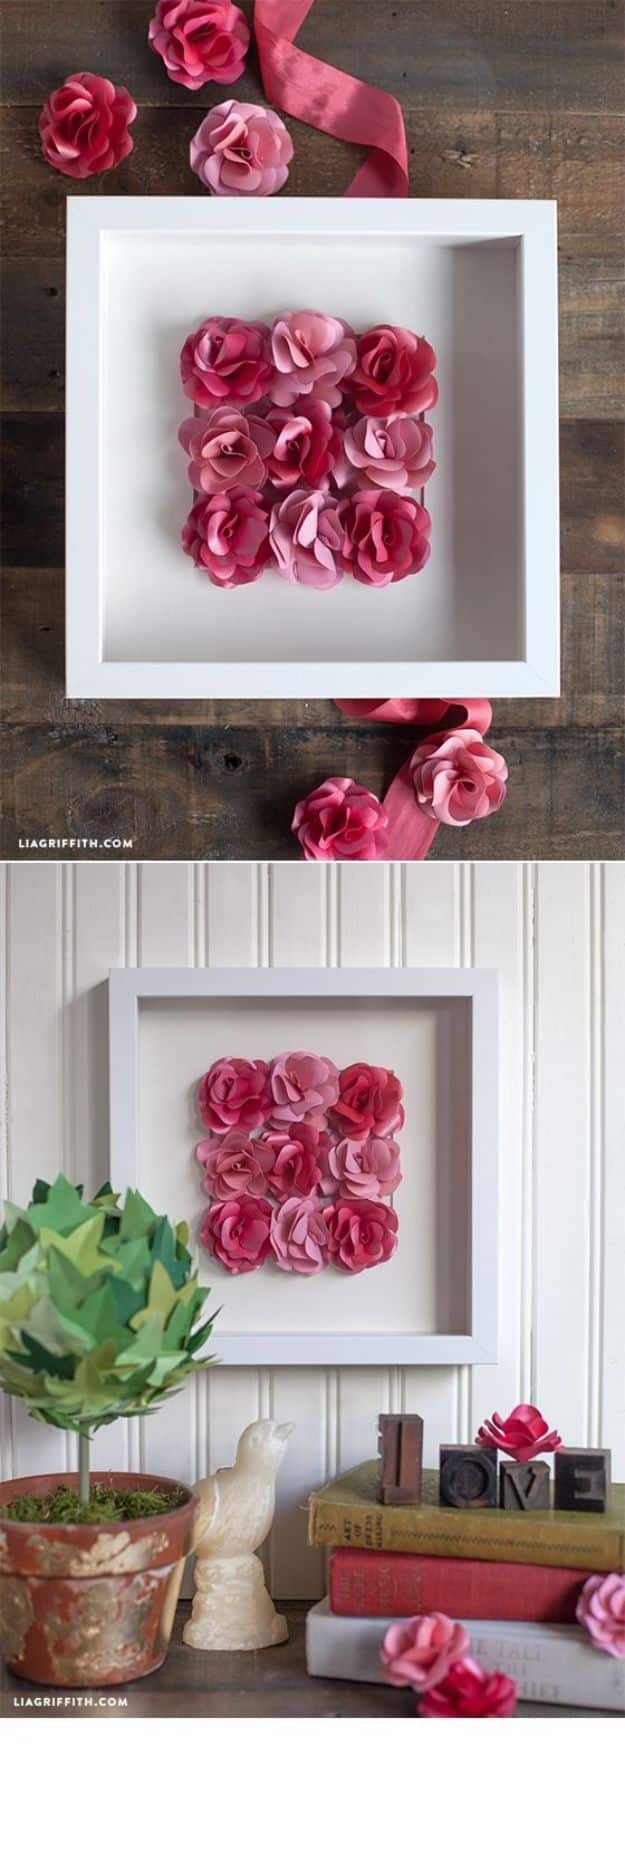 Rose Crafts - Mini Paper Rose Framed Artwork - Easy Craft Projects With Roses - Paper Flowers, Quilt Patterns, DIY Rose Art for Kids - Dried and Real Roses for Wall Art and Do It Yourself Home Decor - Mothers Day Gift Ideas - Fake Rose Arrangements That Look Amazing - Cute Centerrpieces and Crafty DIY Gifts With A Rose http://diyjoy.com/rose-crafts